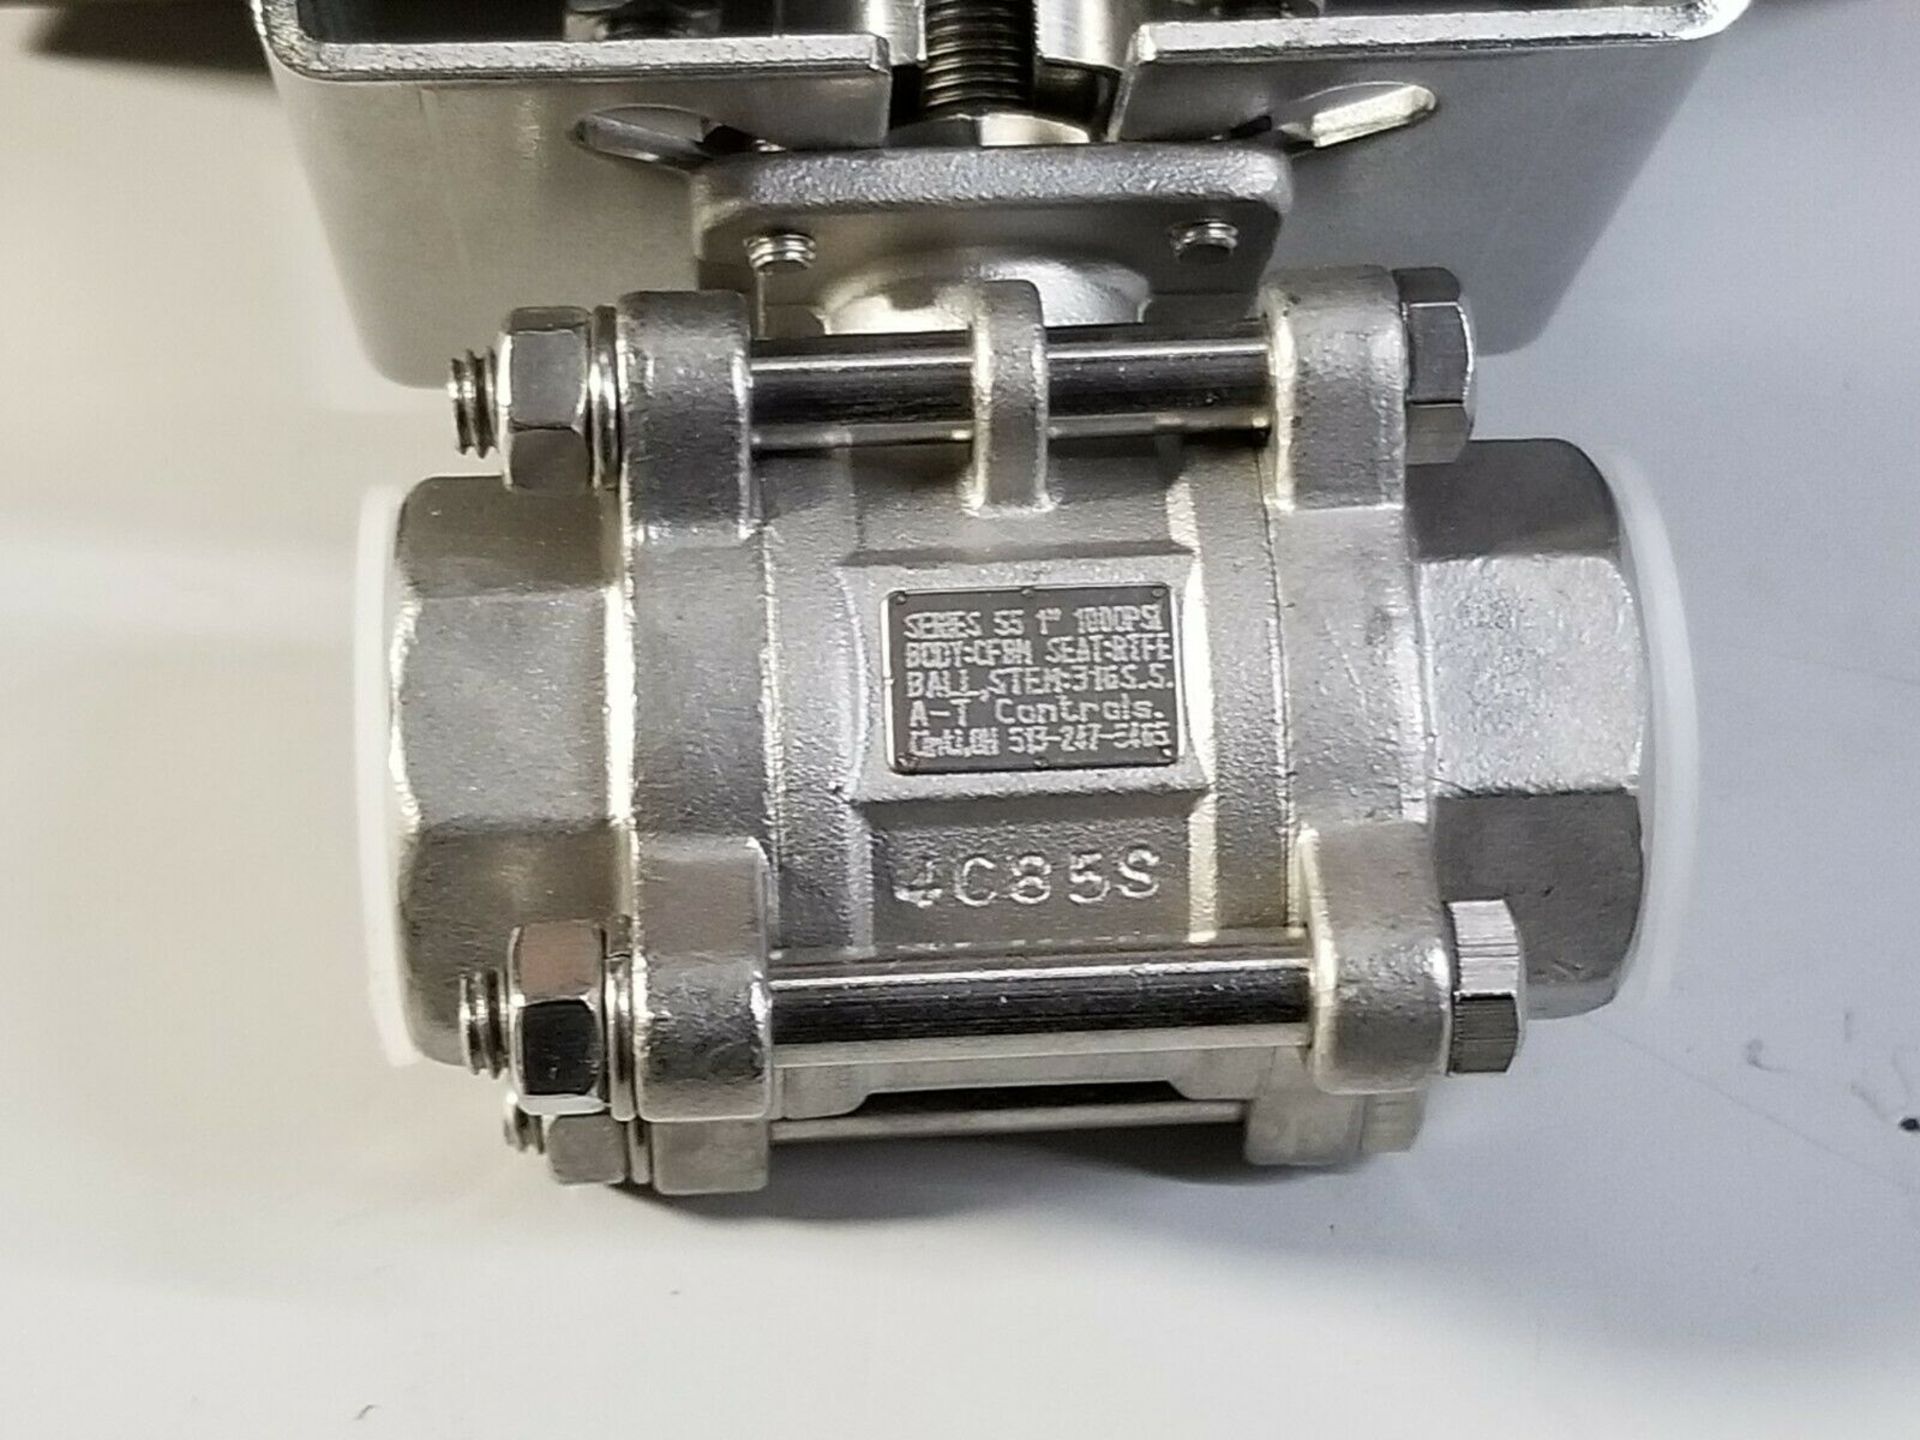 NEW AT 1" 316 STAINLESS STEEL BALL VALVE WITH TRIAC ACTUATOR - Image 4 of 10